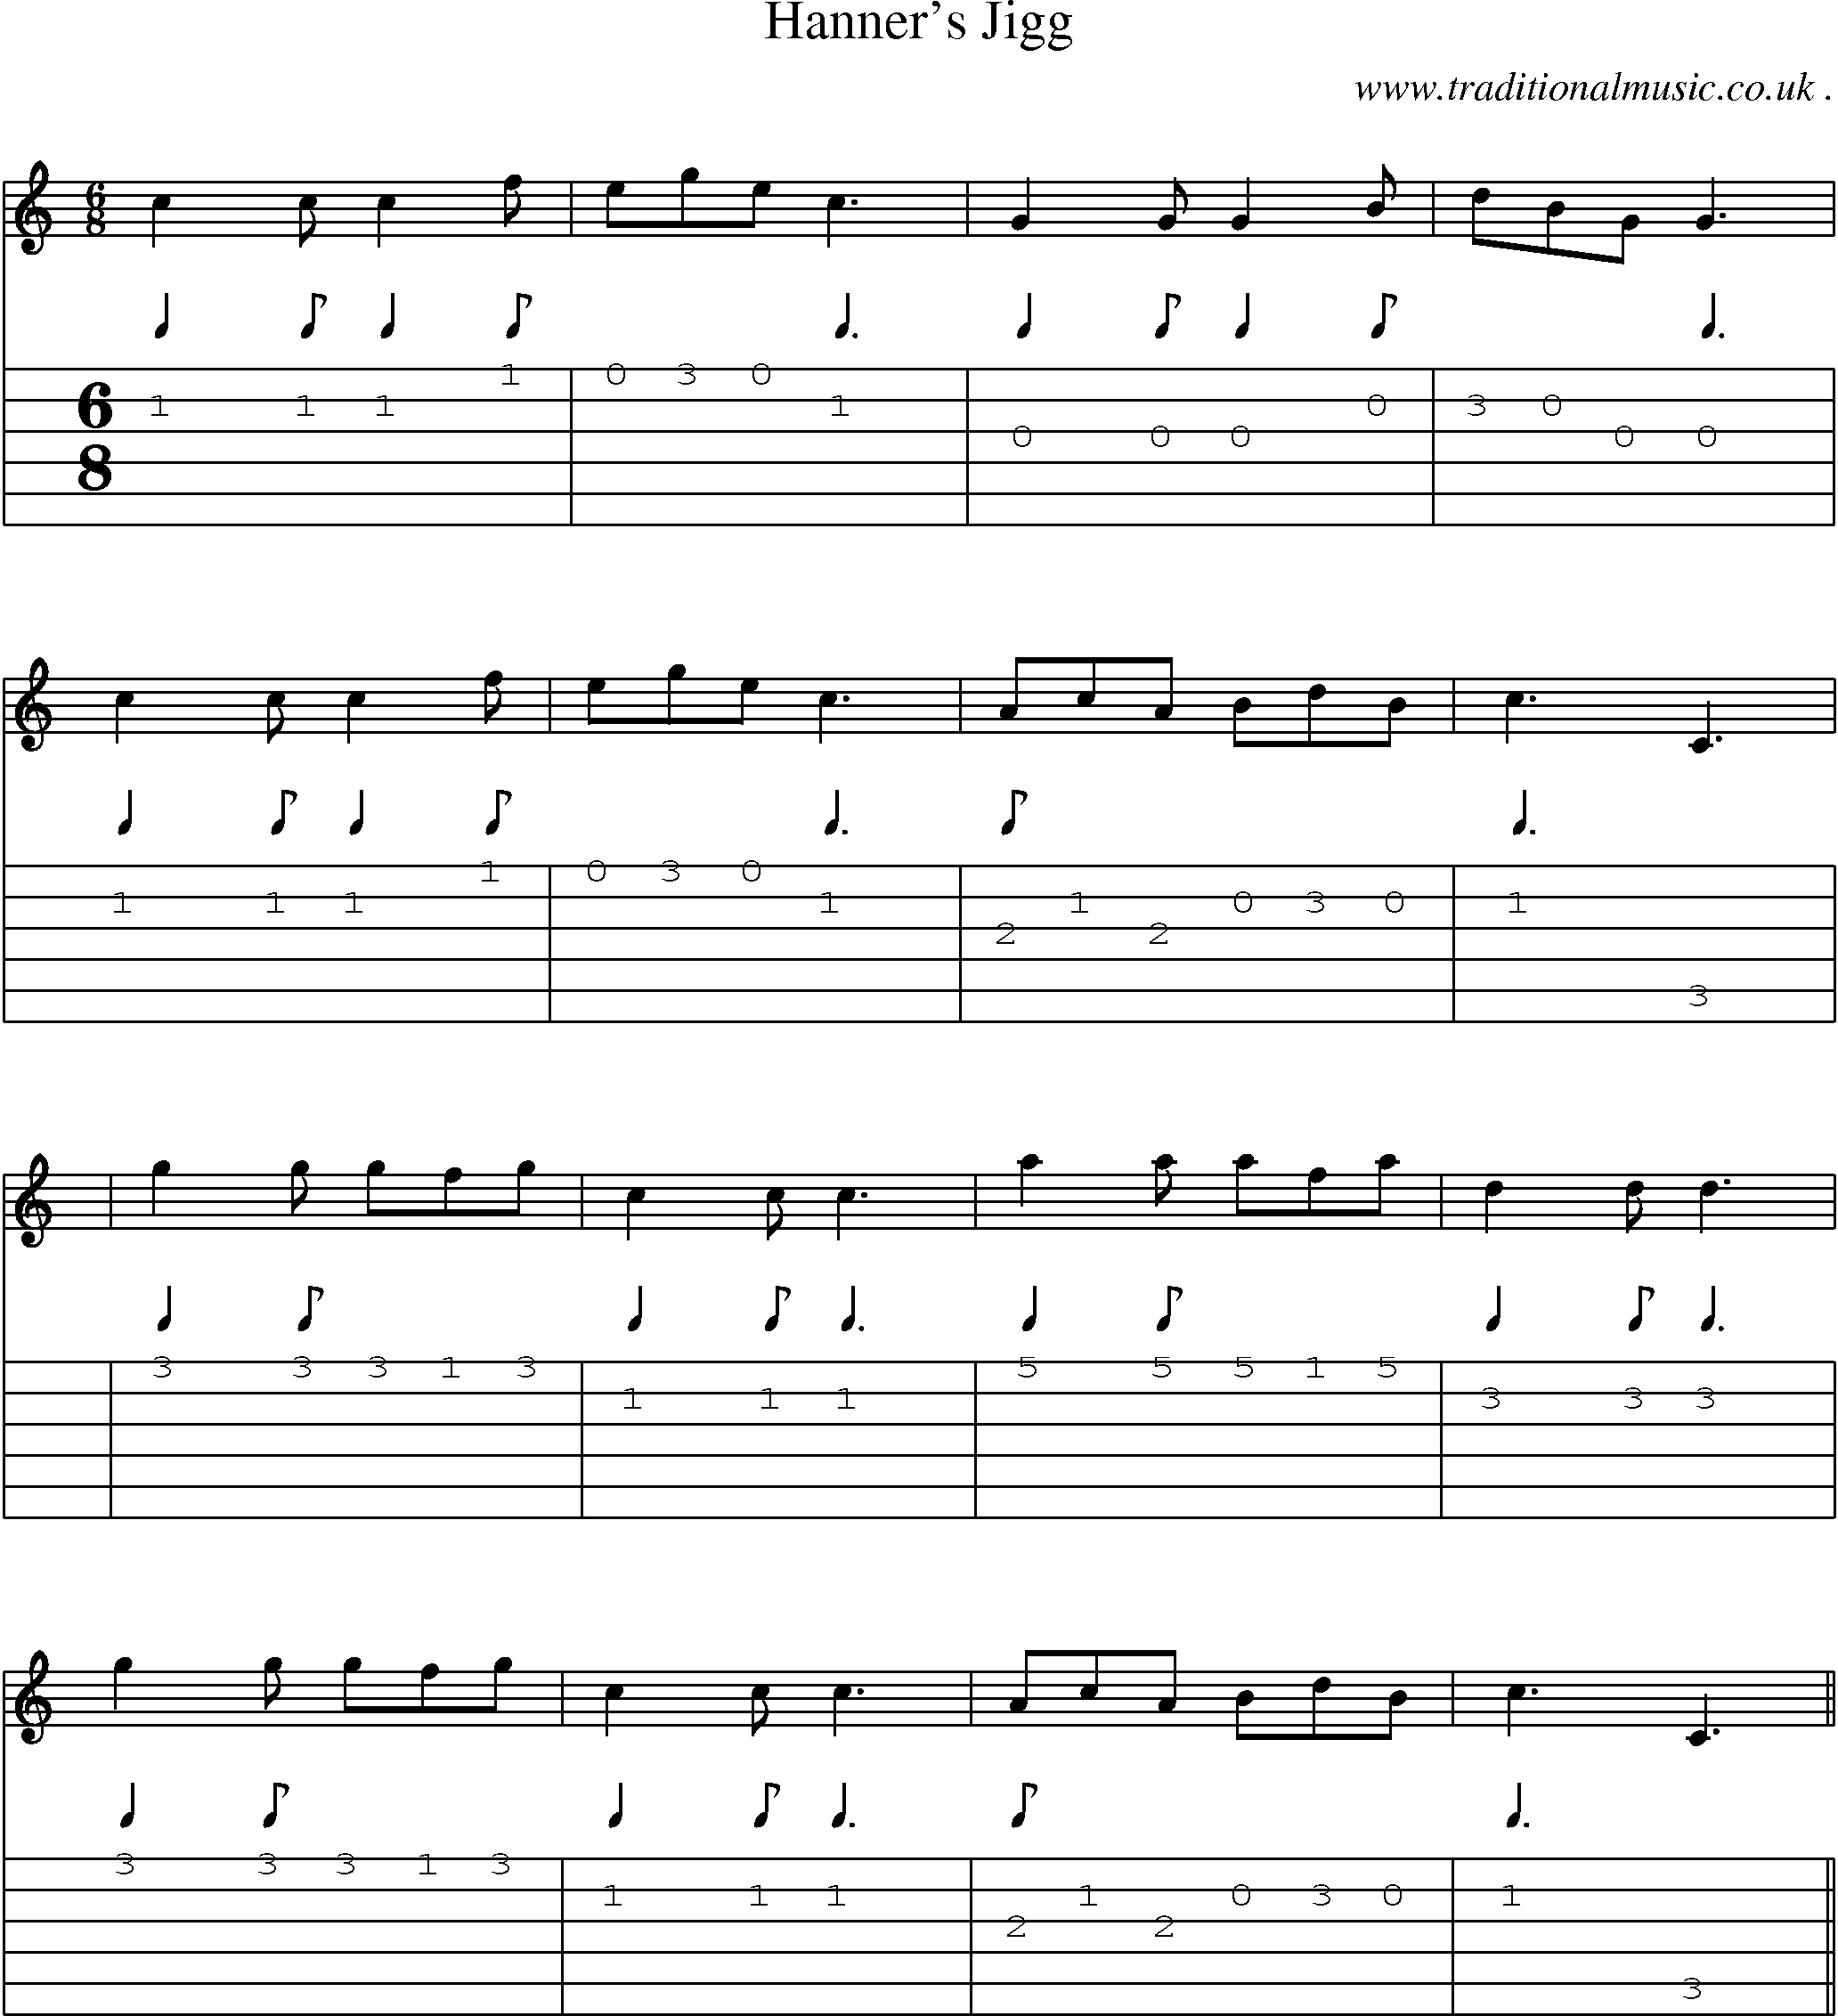 Sheet-Music and Guitar Tabs for Hanner Jigg